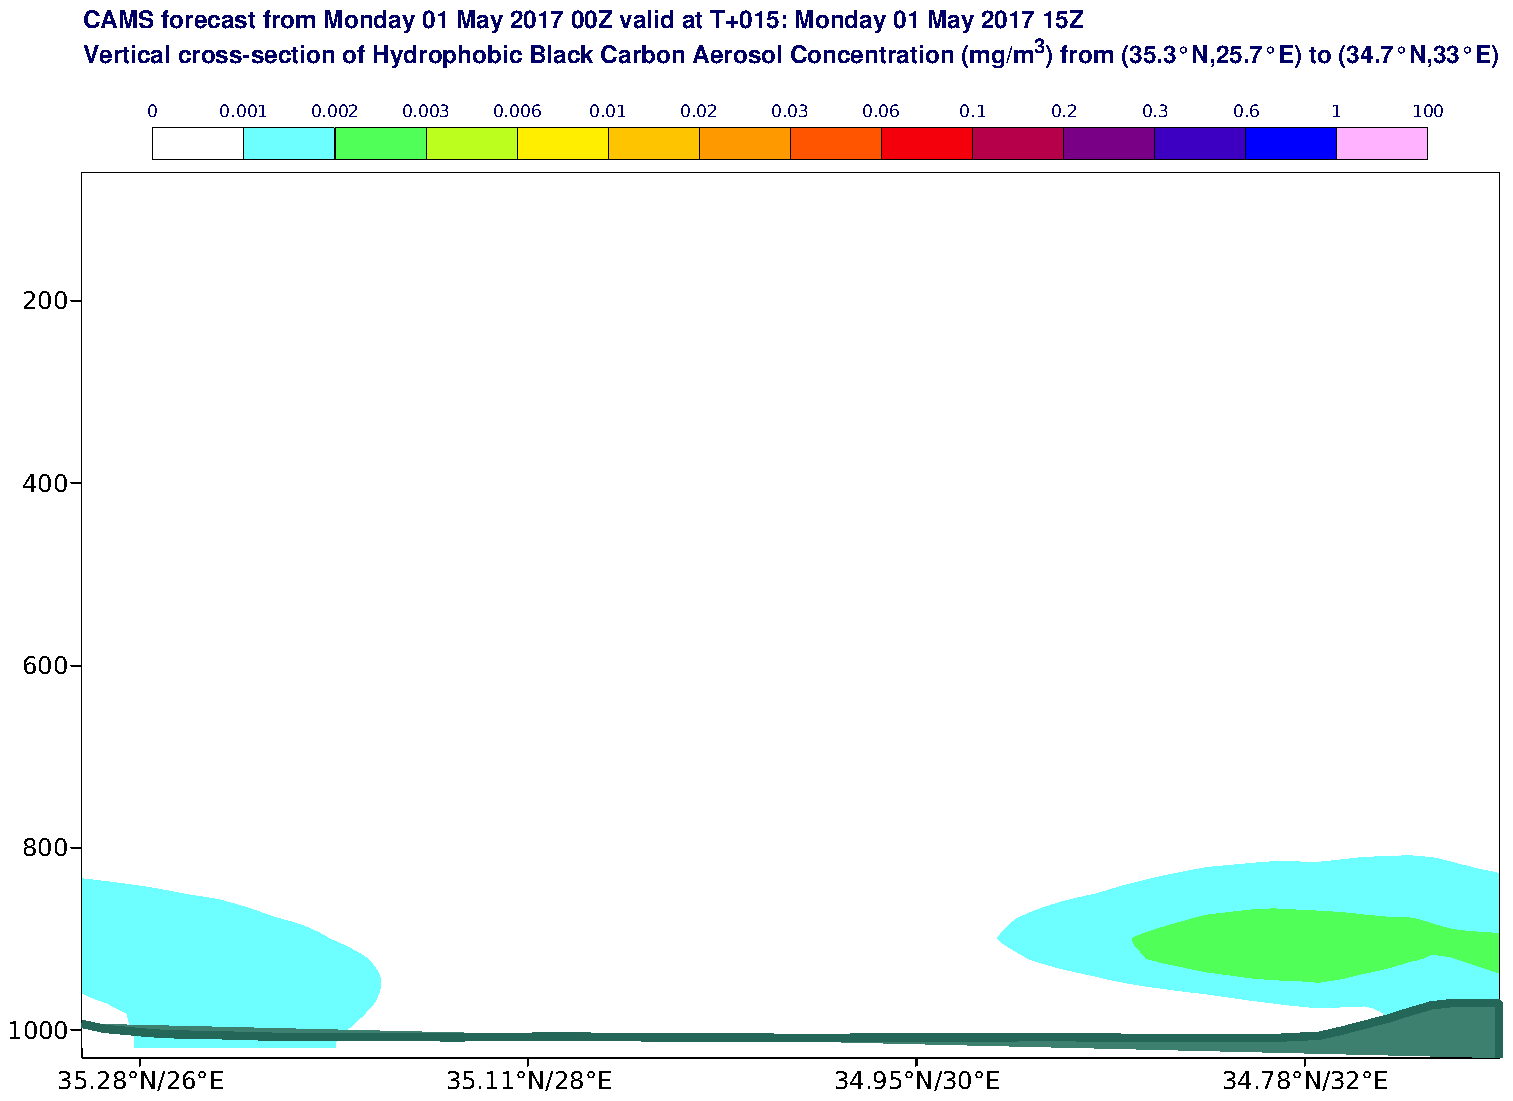 Vertical cross-section of Hydrophobic Black Carbon Aerosol Concentration (mg/m3) valid at T15 - 2017-05-01 15:00